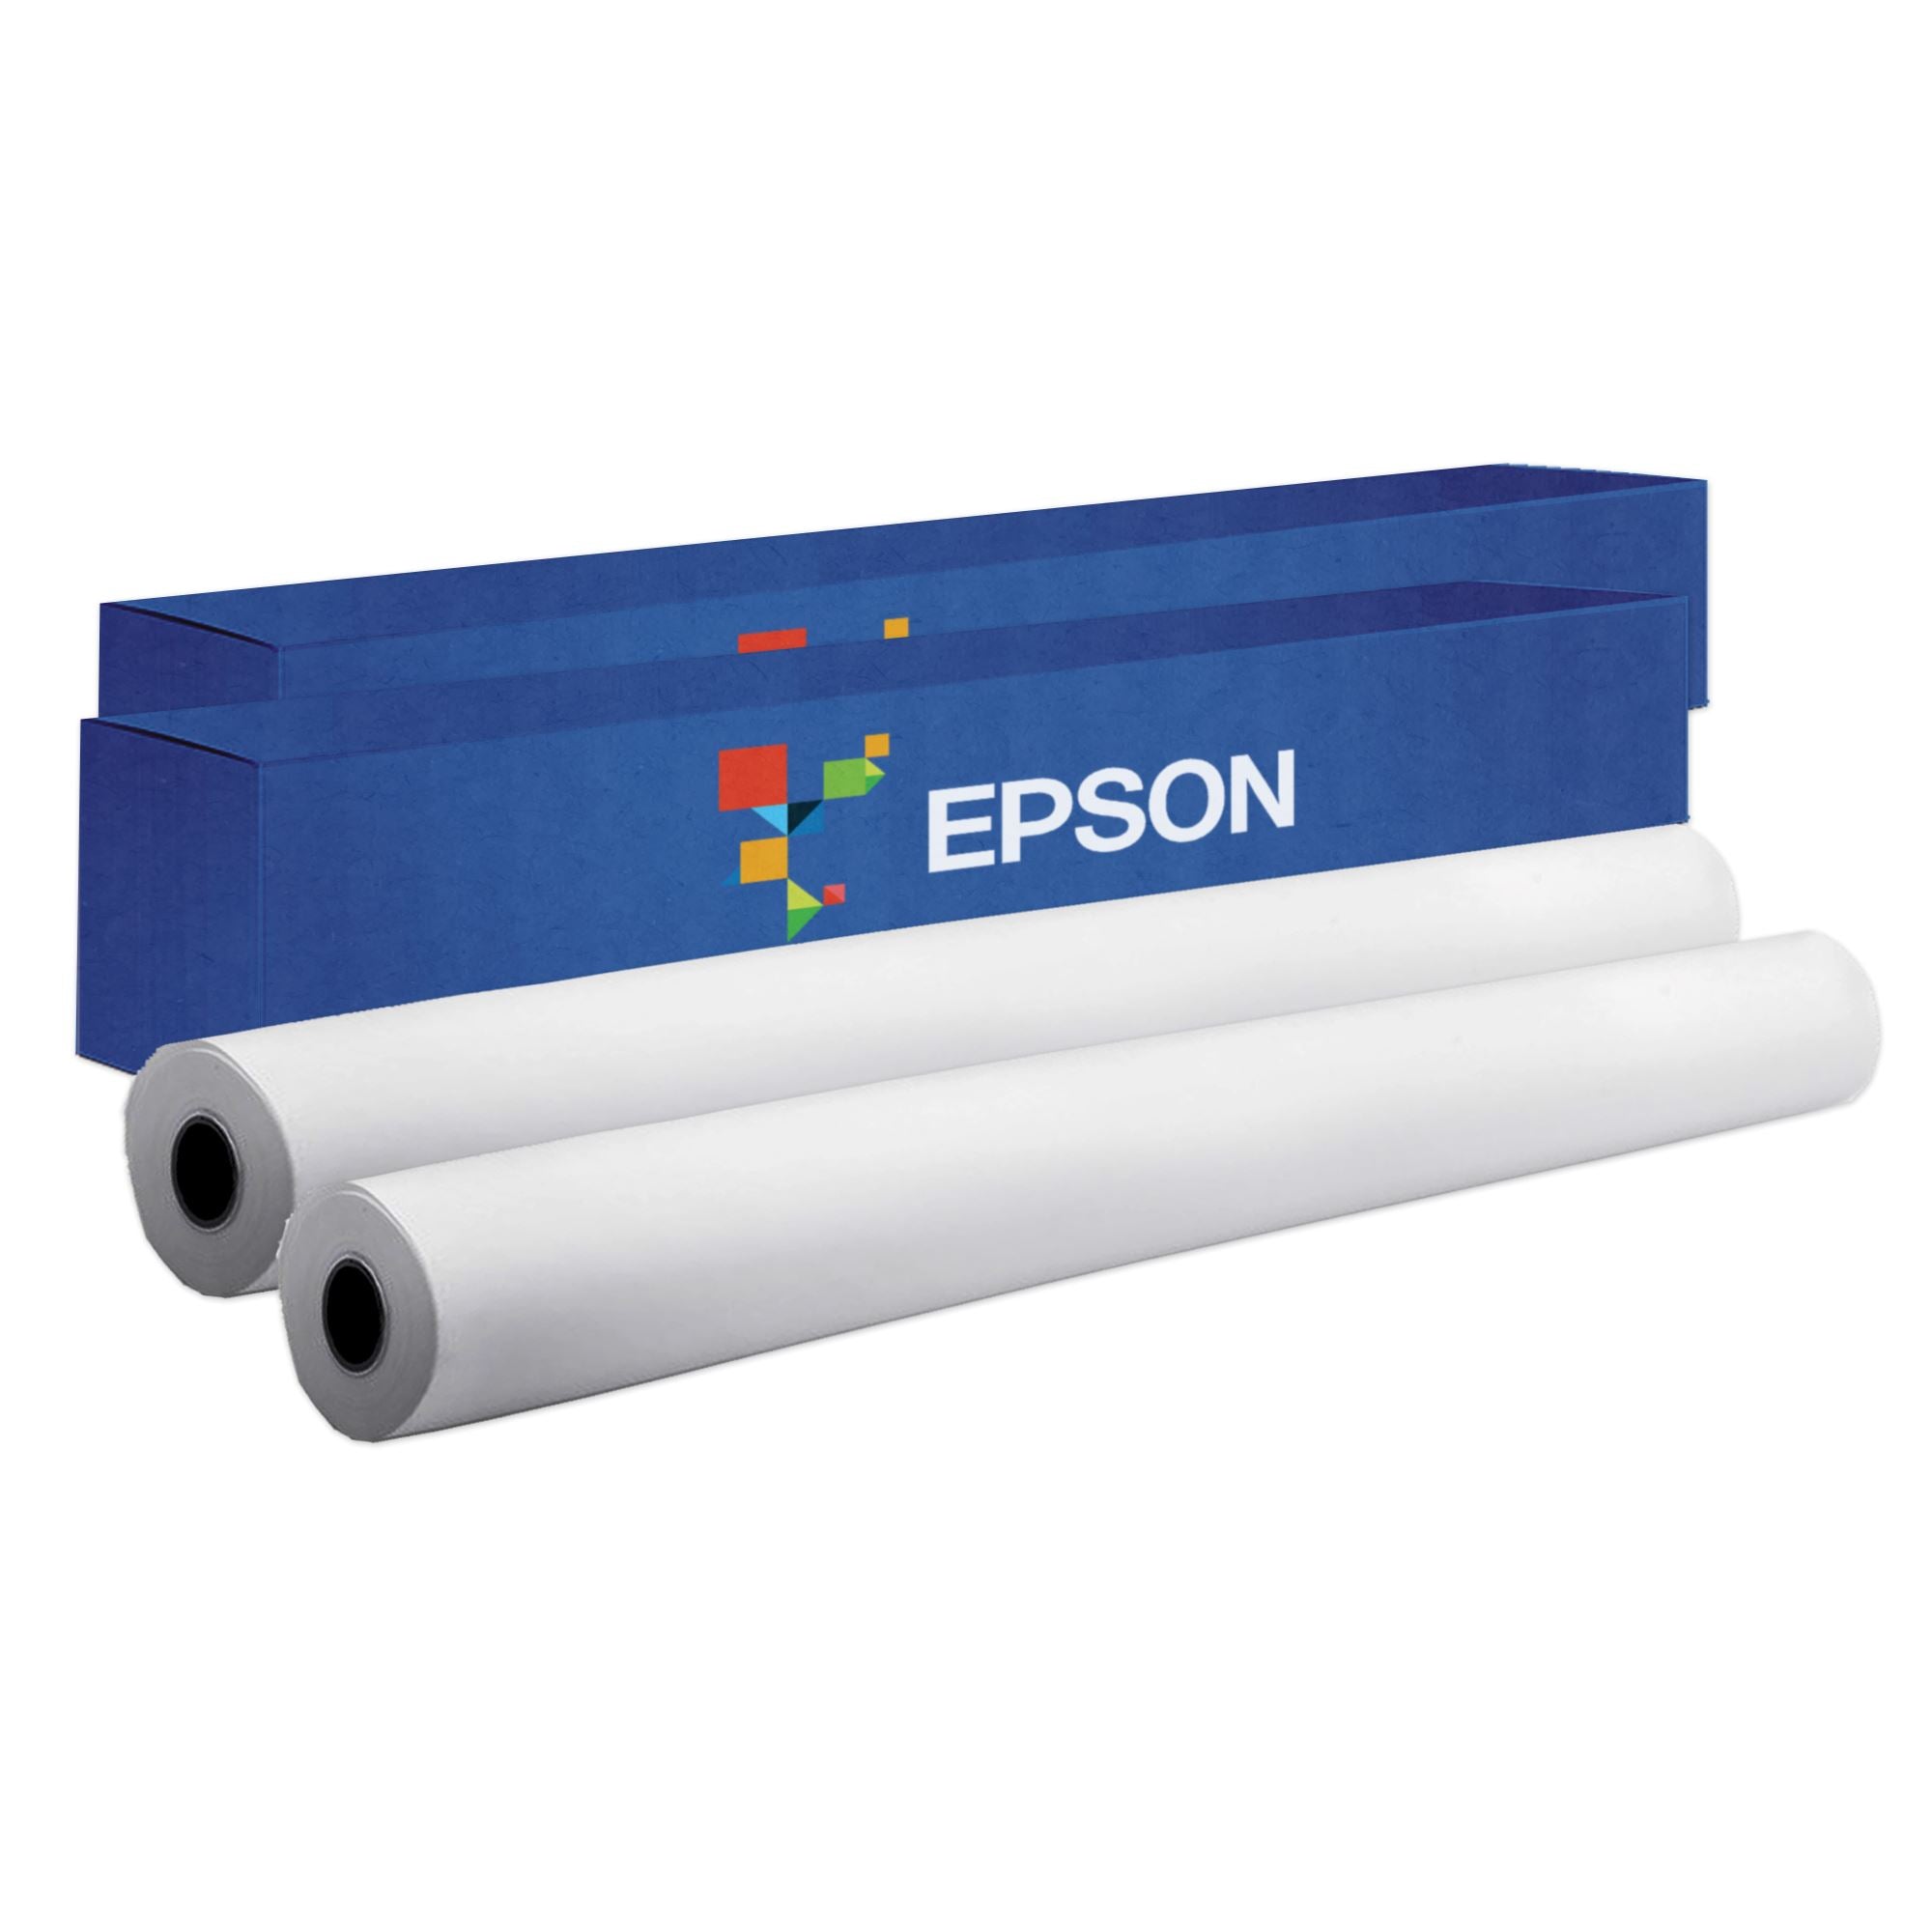 Epson F570 DS Transfer Multi Use Paper 24 x 100 ft Roll - 2 Pack